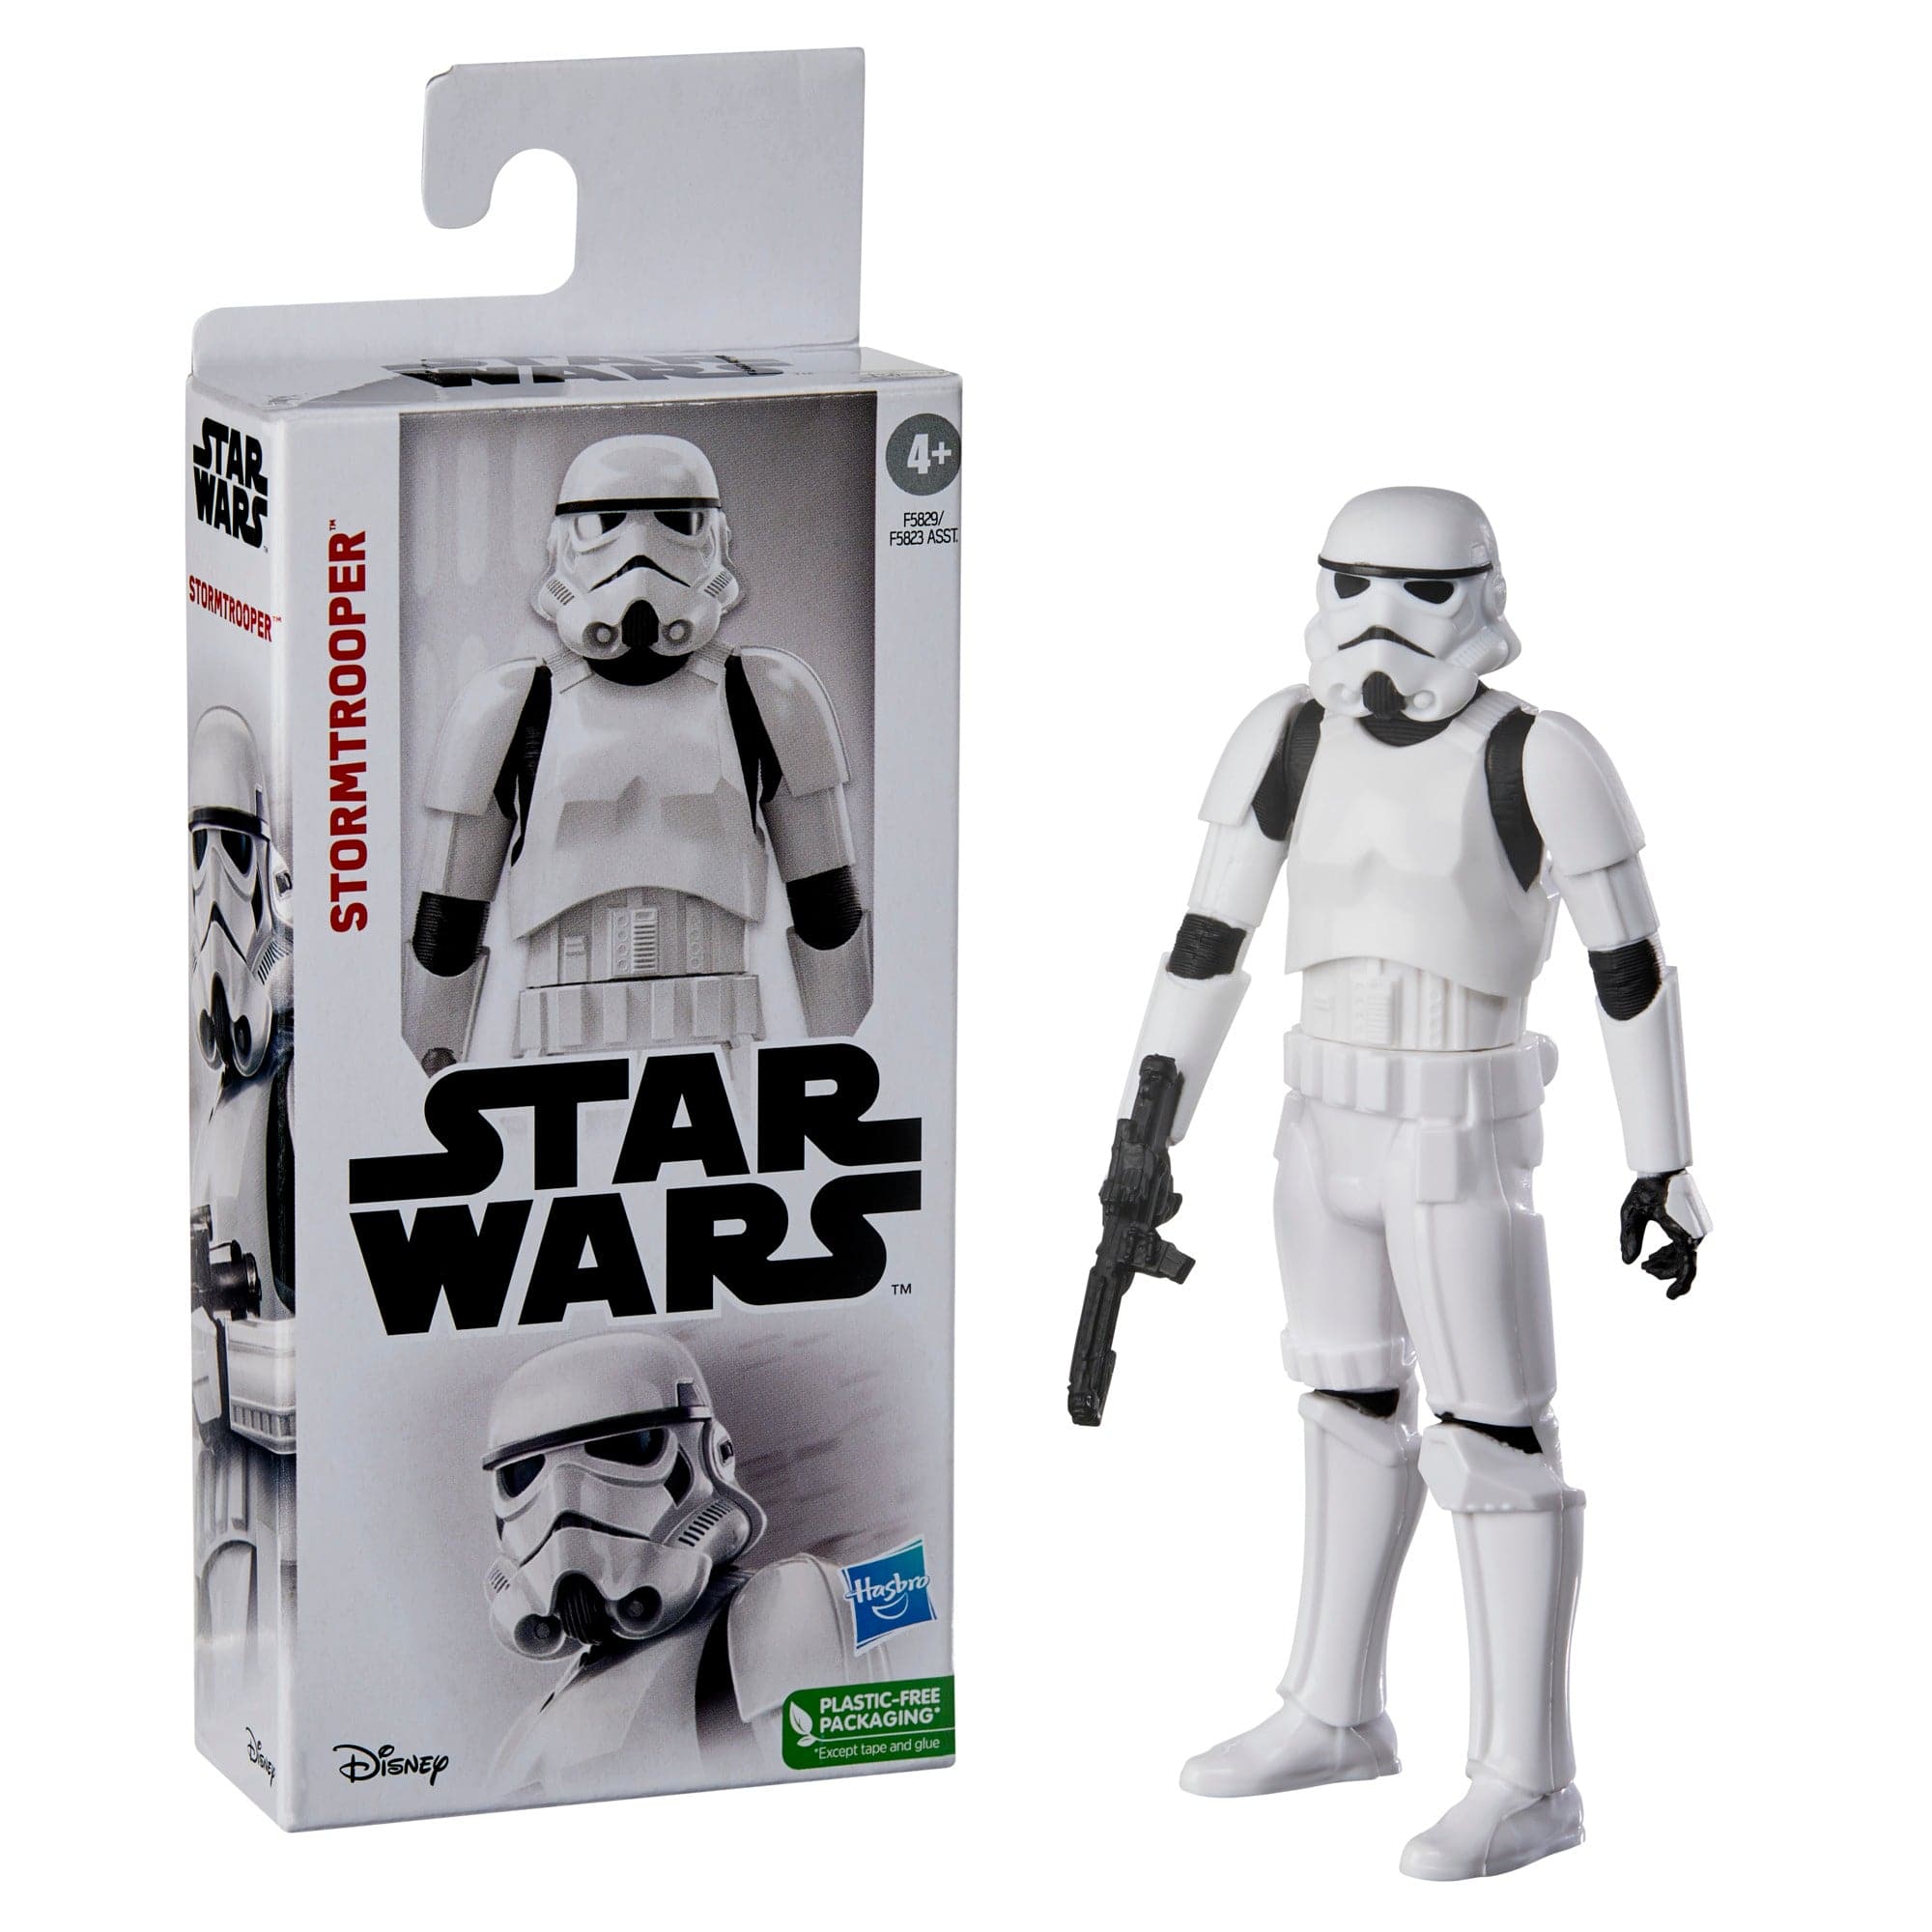 Hasbro-Star Wars 6-inch Action Figure Assortment-F5829-Stormtrooper-Legacy Toys